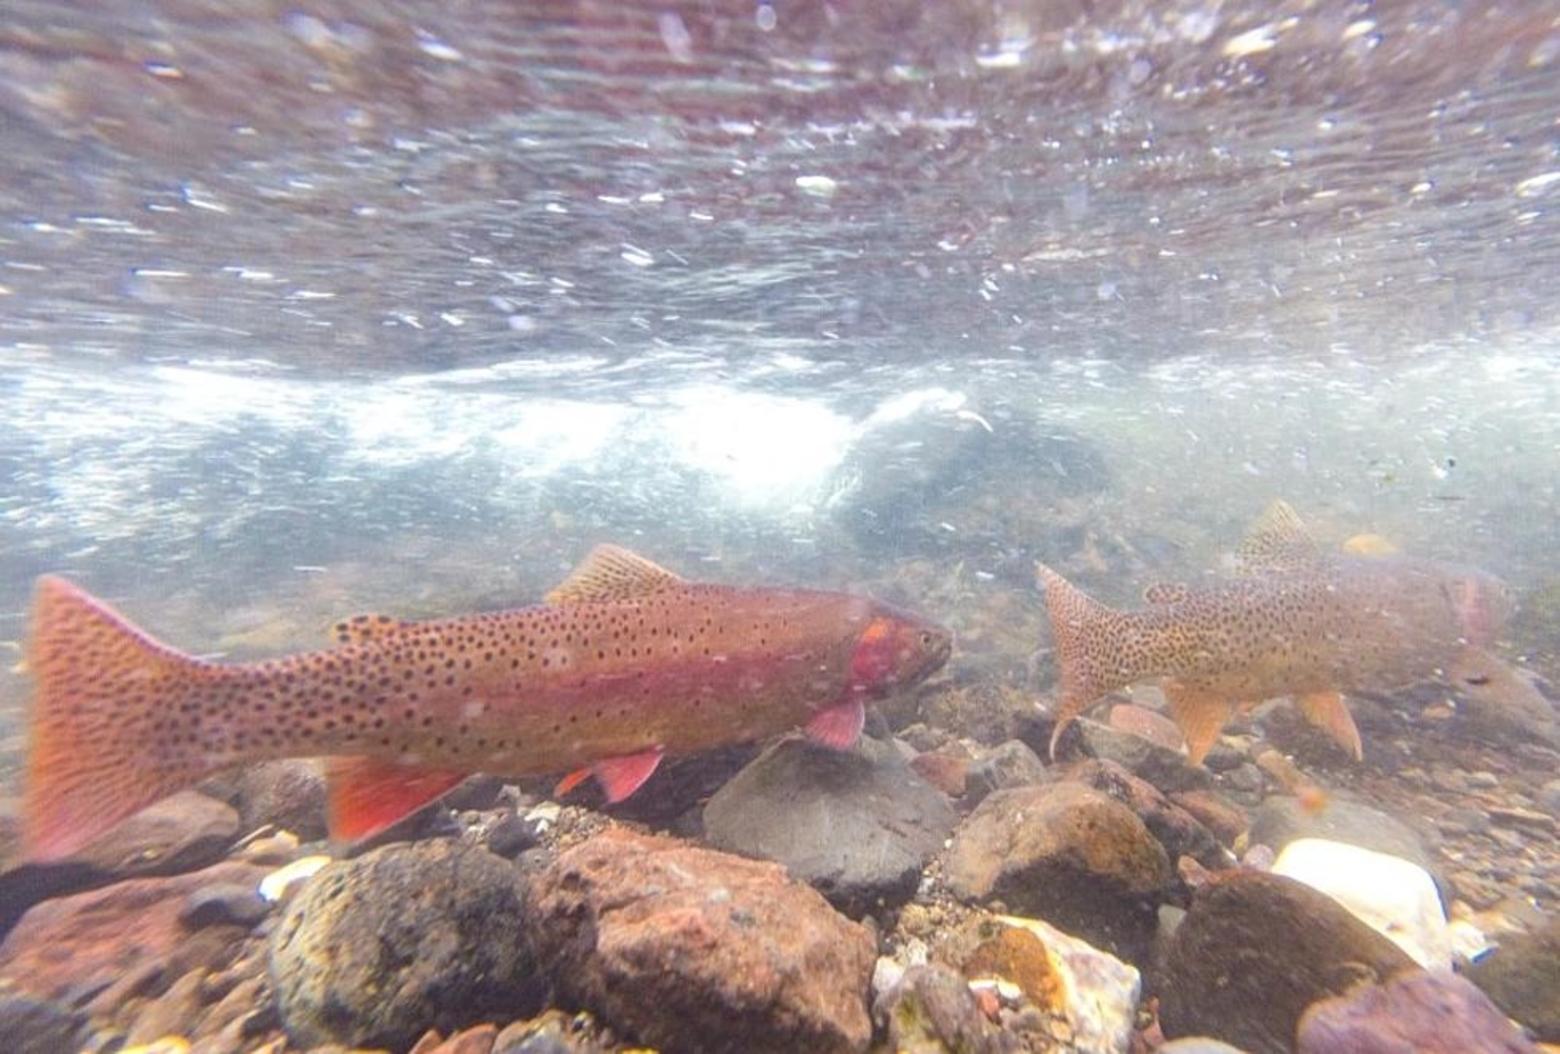 The final decision by CGNF to kill off nonnative rainbow trout in Buffalo Creek and replace them with nonnative cutthroat trout spurred a lawsuit over what constitutes appropriate action in wilderness areas. Photo by Jacob W. Frank/NPS